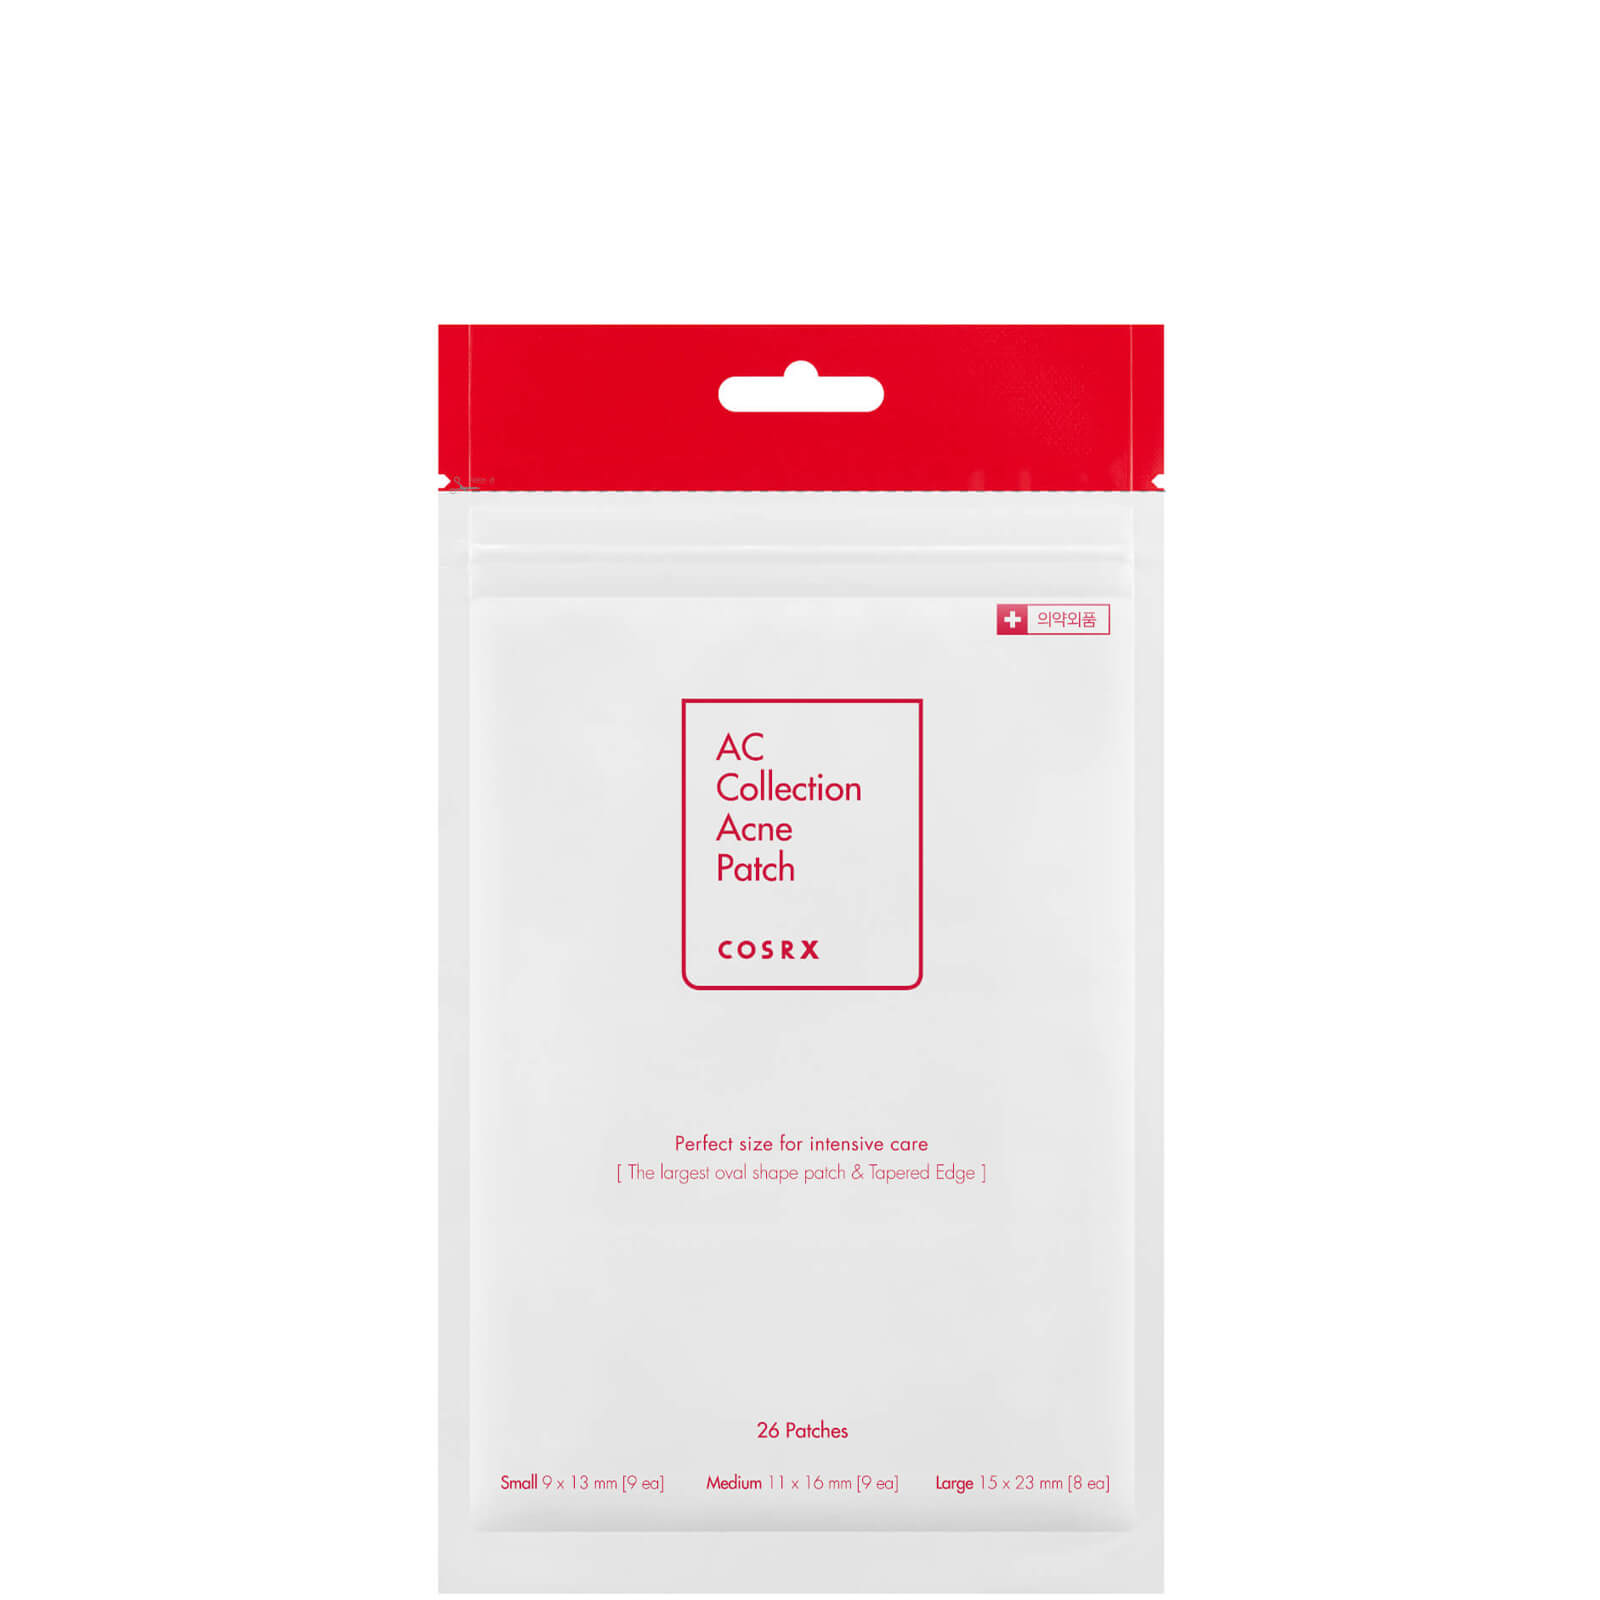 Image of COSRX AC Collection Acne Patch (26 Patches)